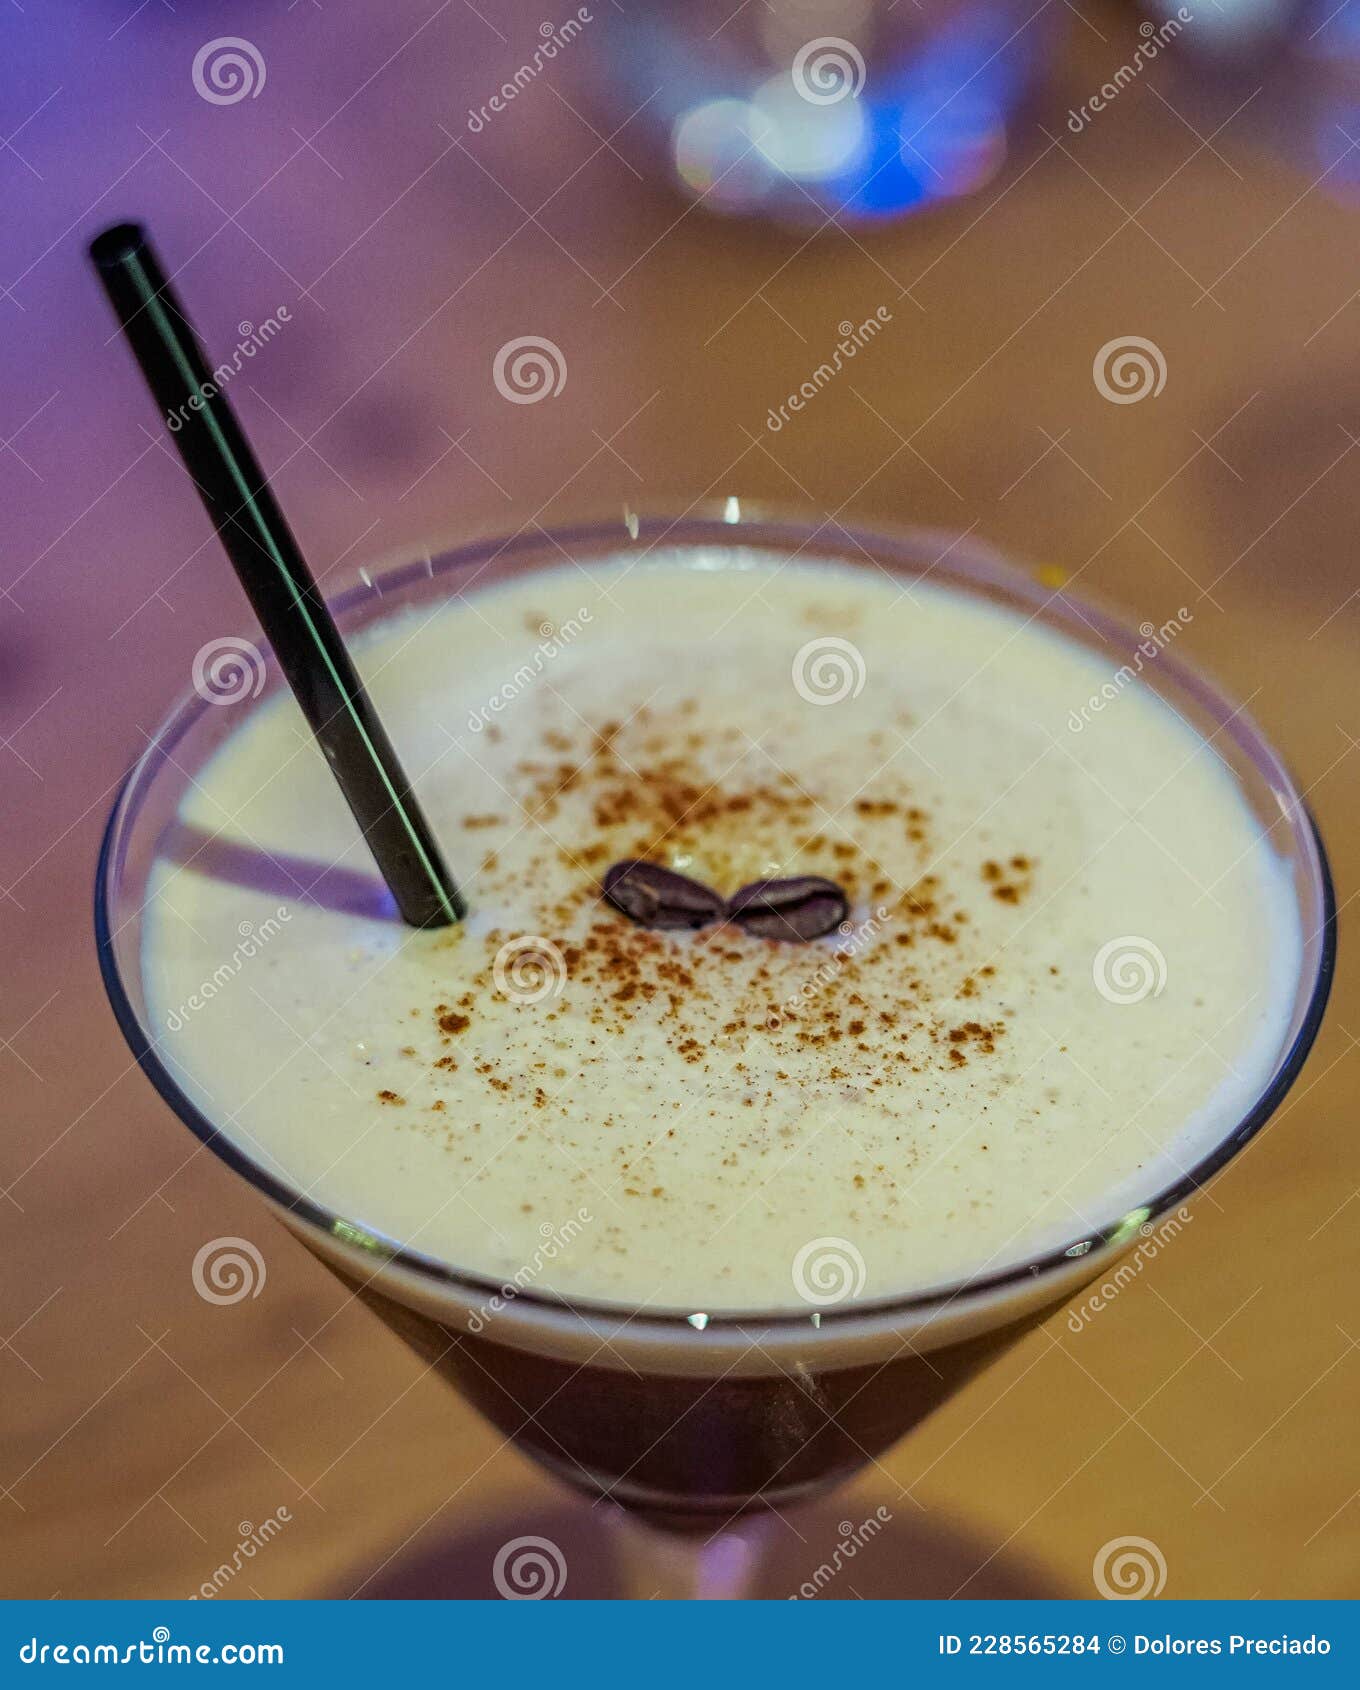 alcoholic cocktail based on coffee and vodka